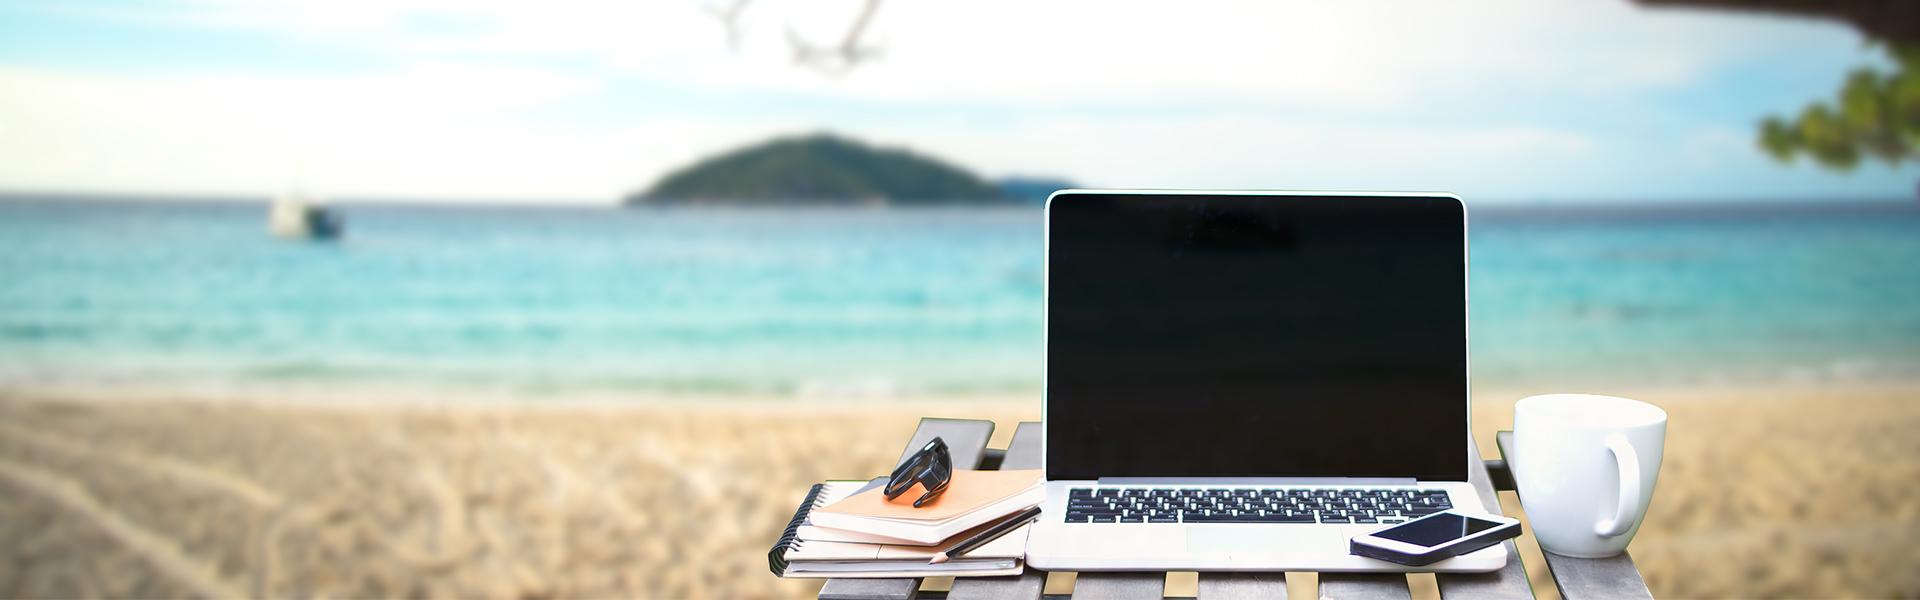 Front view of cup and laptop on table in Office park and blurred background of the beach in the summer, Similan, Thailand